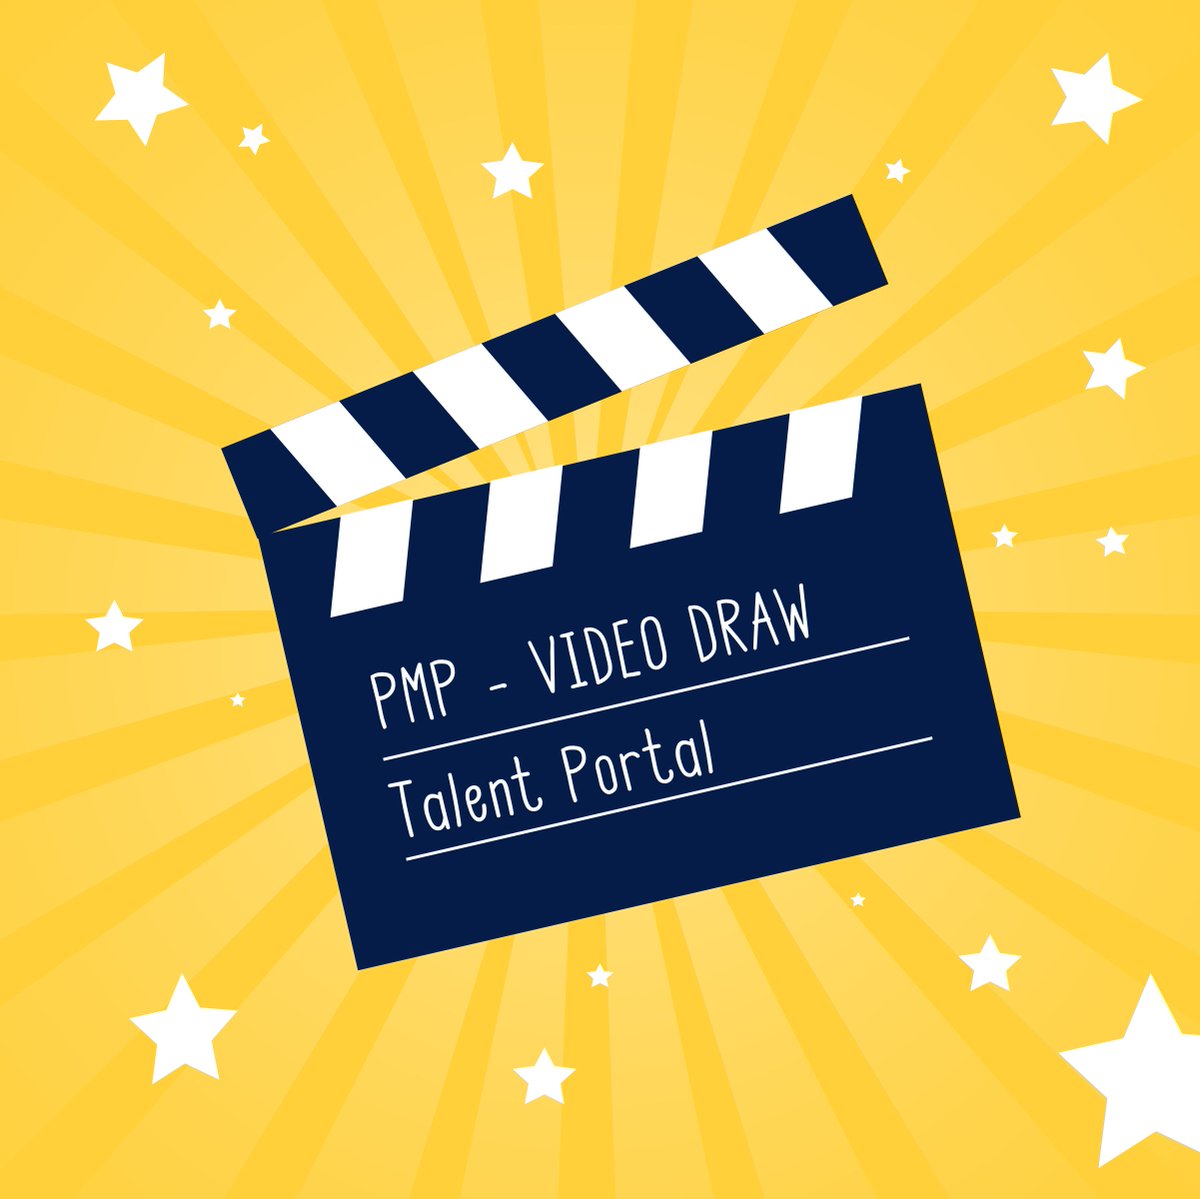 Are you a band or artist wanting to share your music? PMP is looking to showcase your songs on our Video Draw — submit your mp.4 tracks to admin@pickmypostcode.com along with any social media links you'd like promoted. 🎵 #MusicSubmissions #PickMyPostcode #PMP